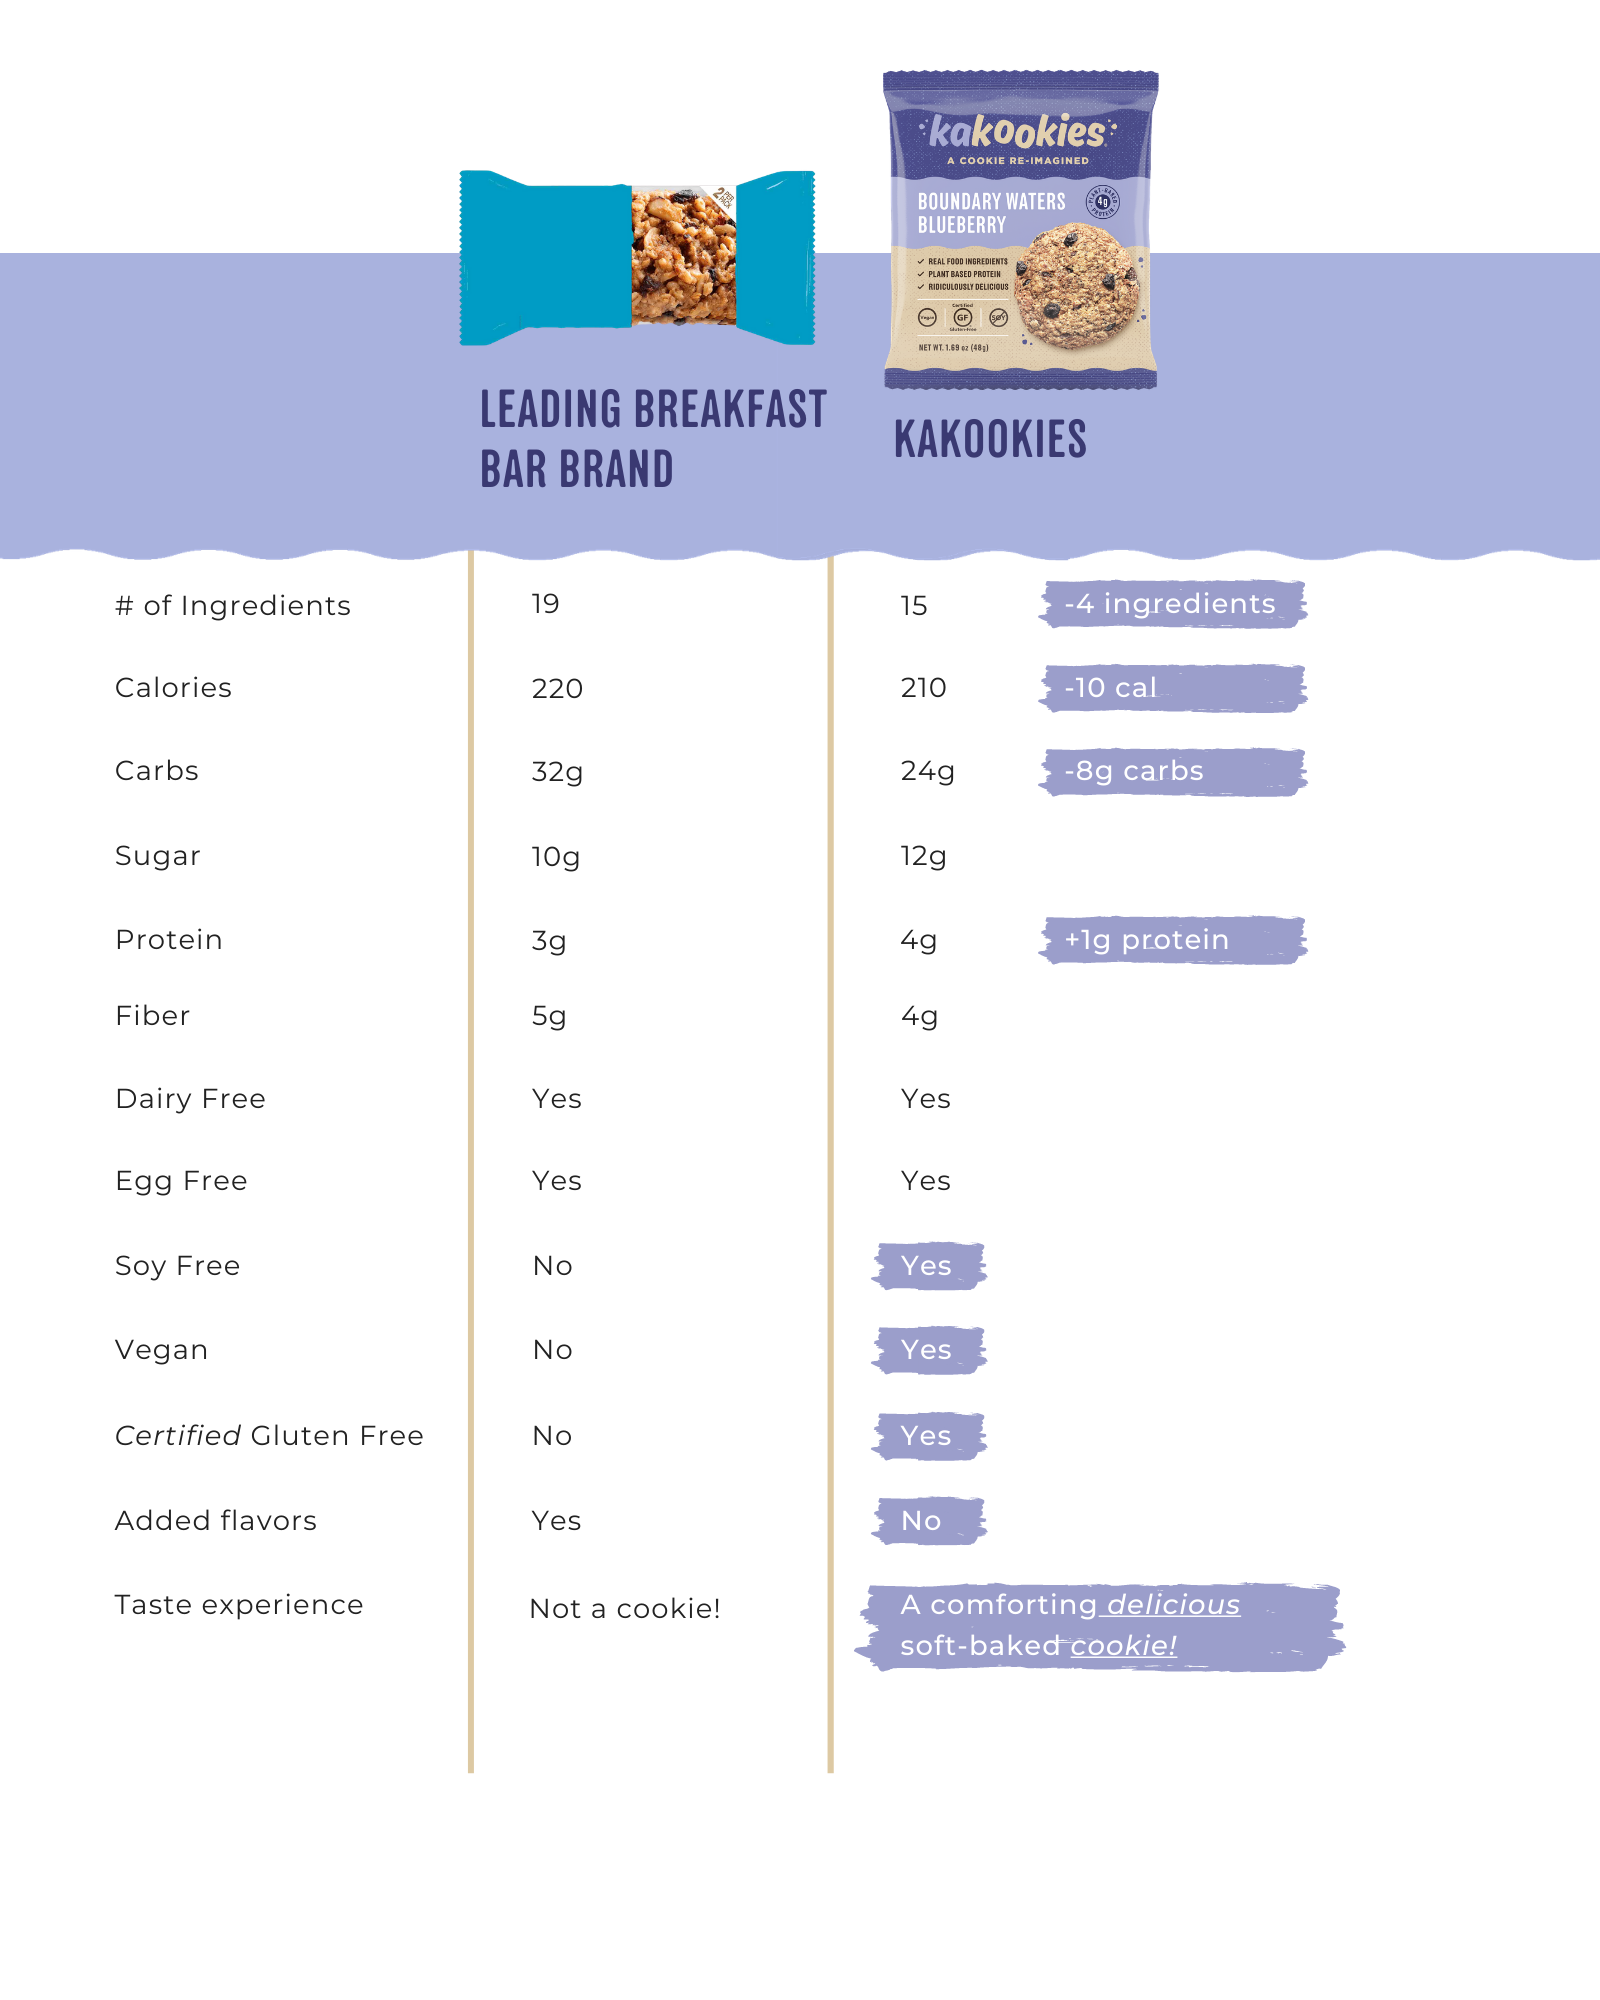 comparison to leading blueberry breakfast bar